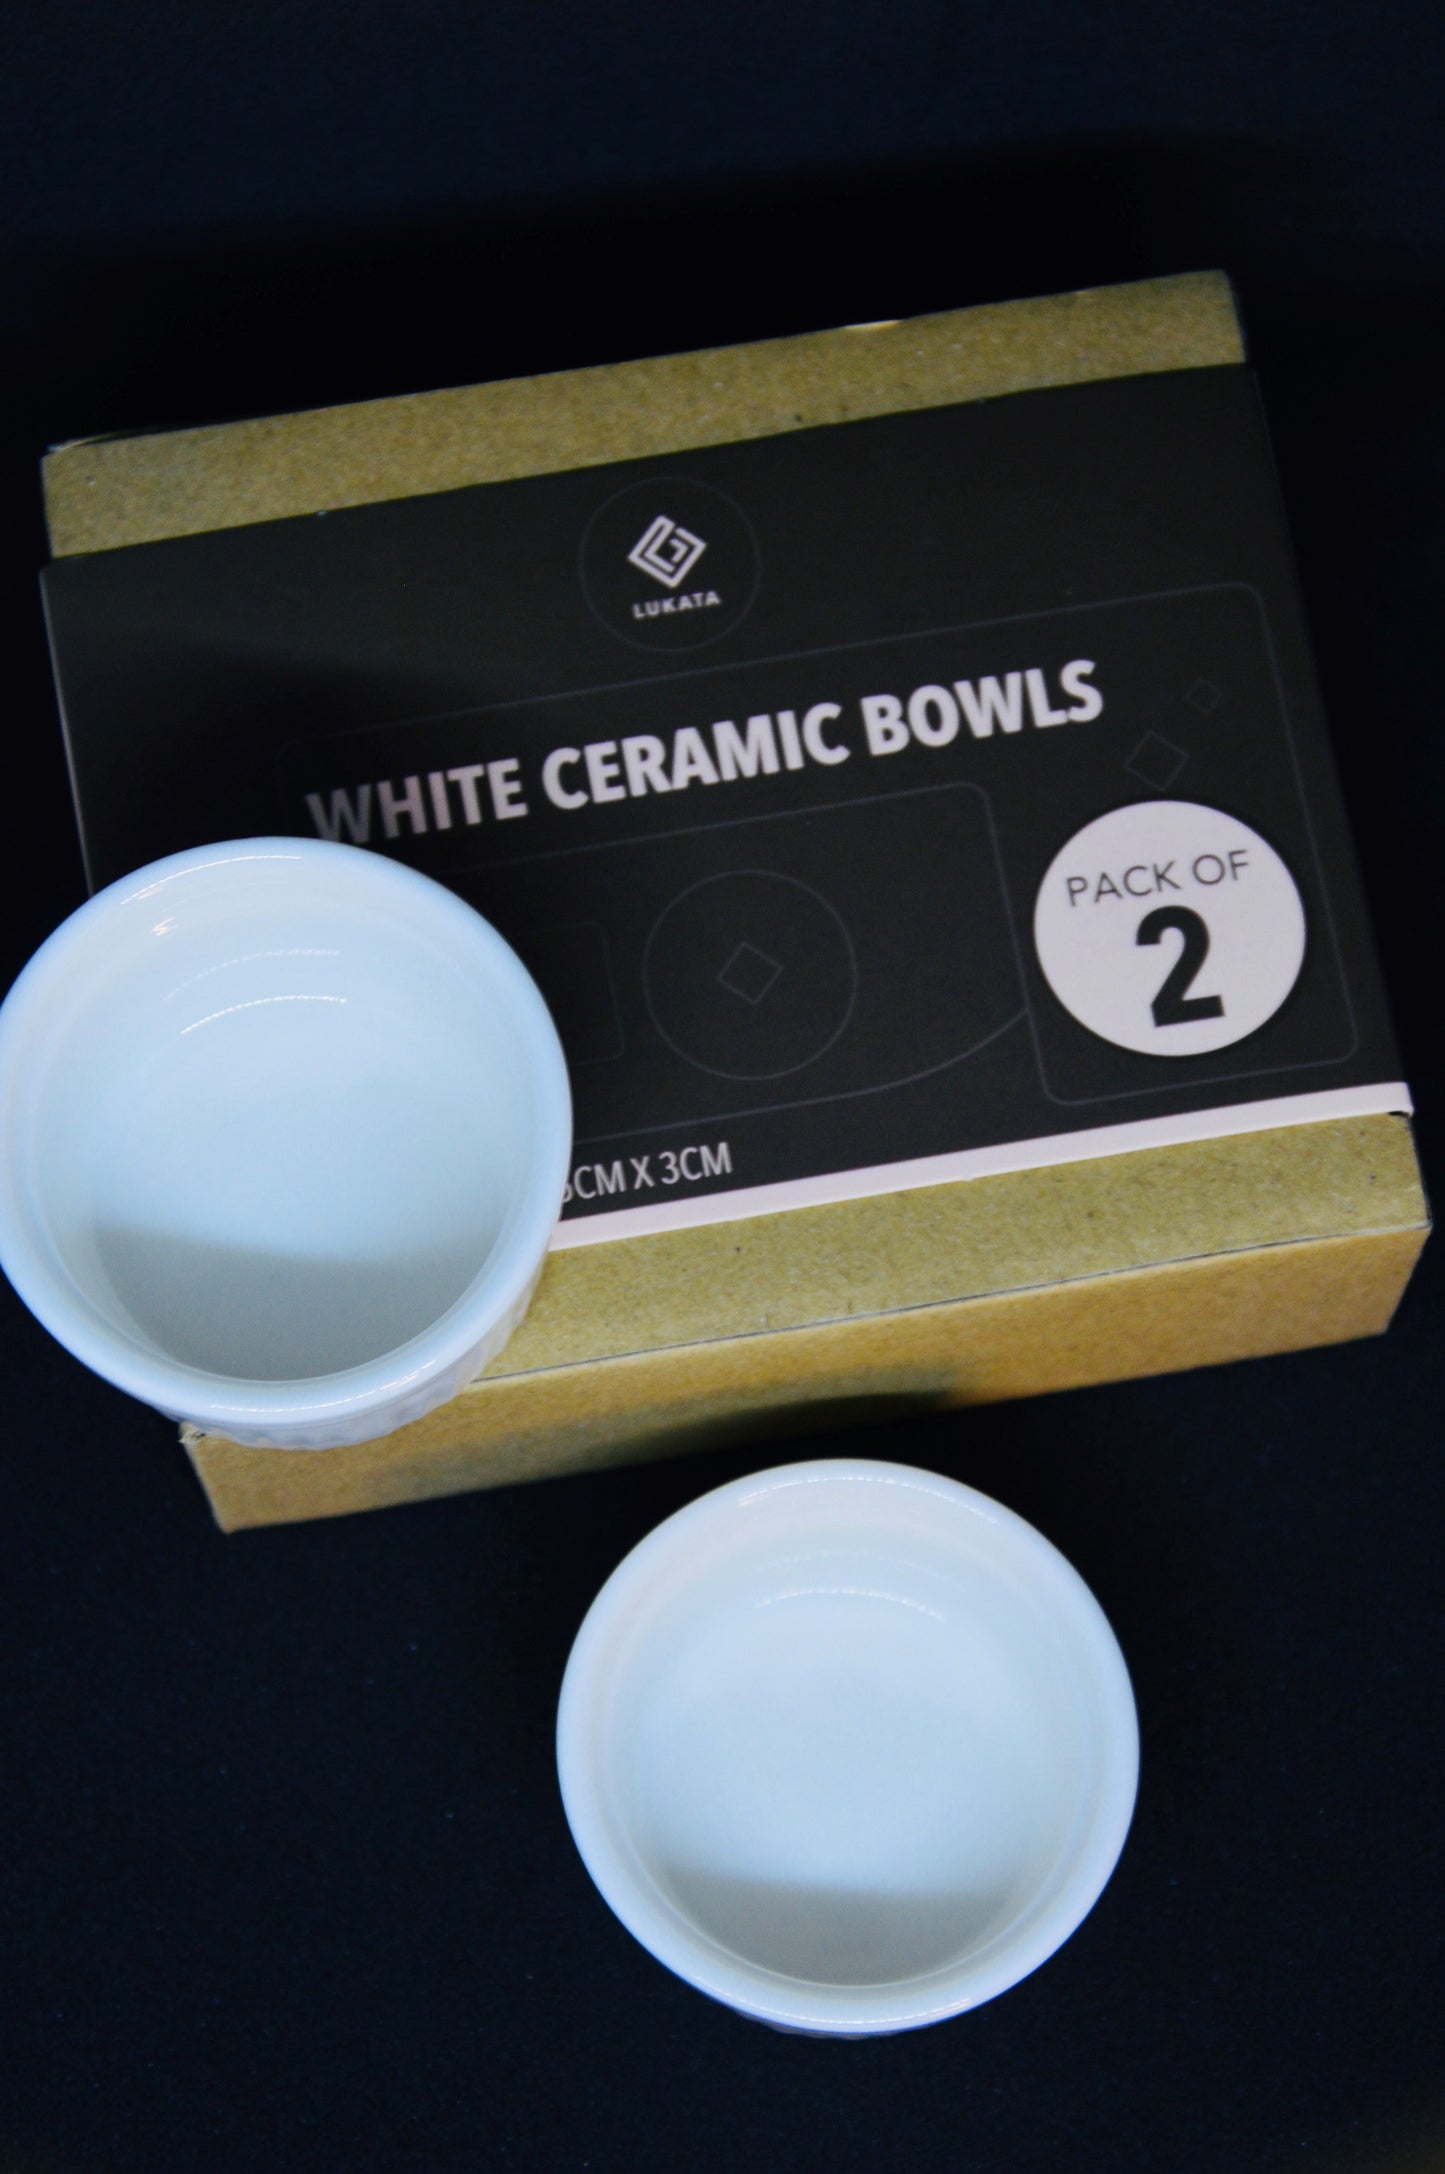 White Small Ceramic Bowls (2 Pack) - Small 5cm x 3cm for Hot Sauces Snacks - Perfect for Lukata Cheese Board